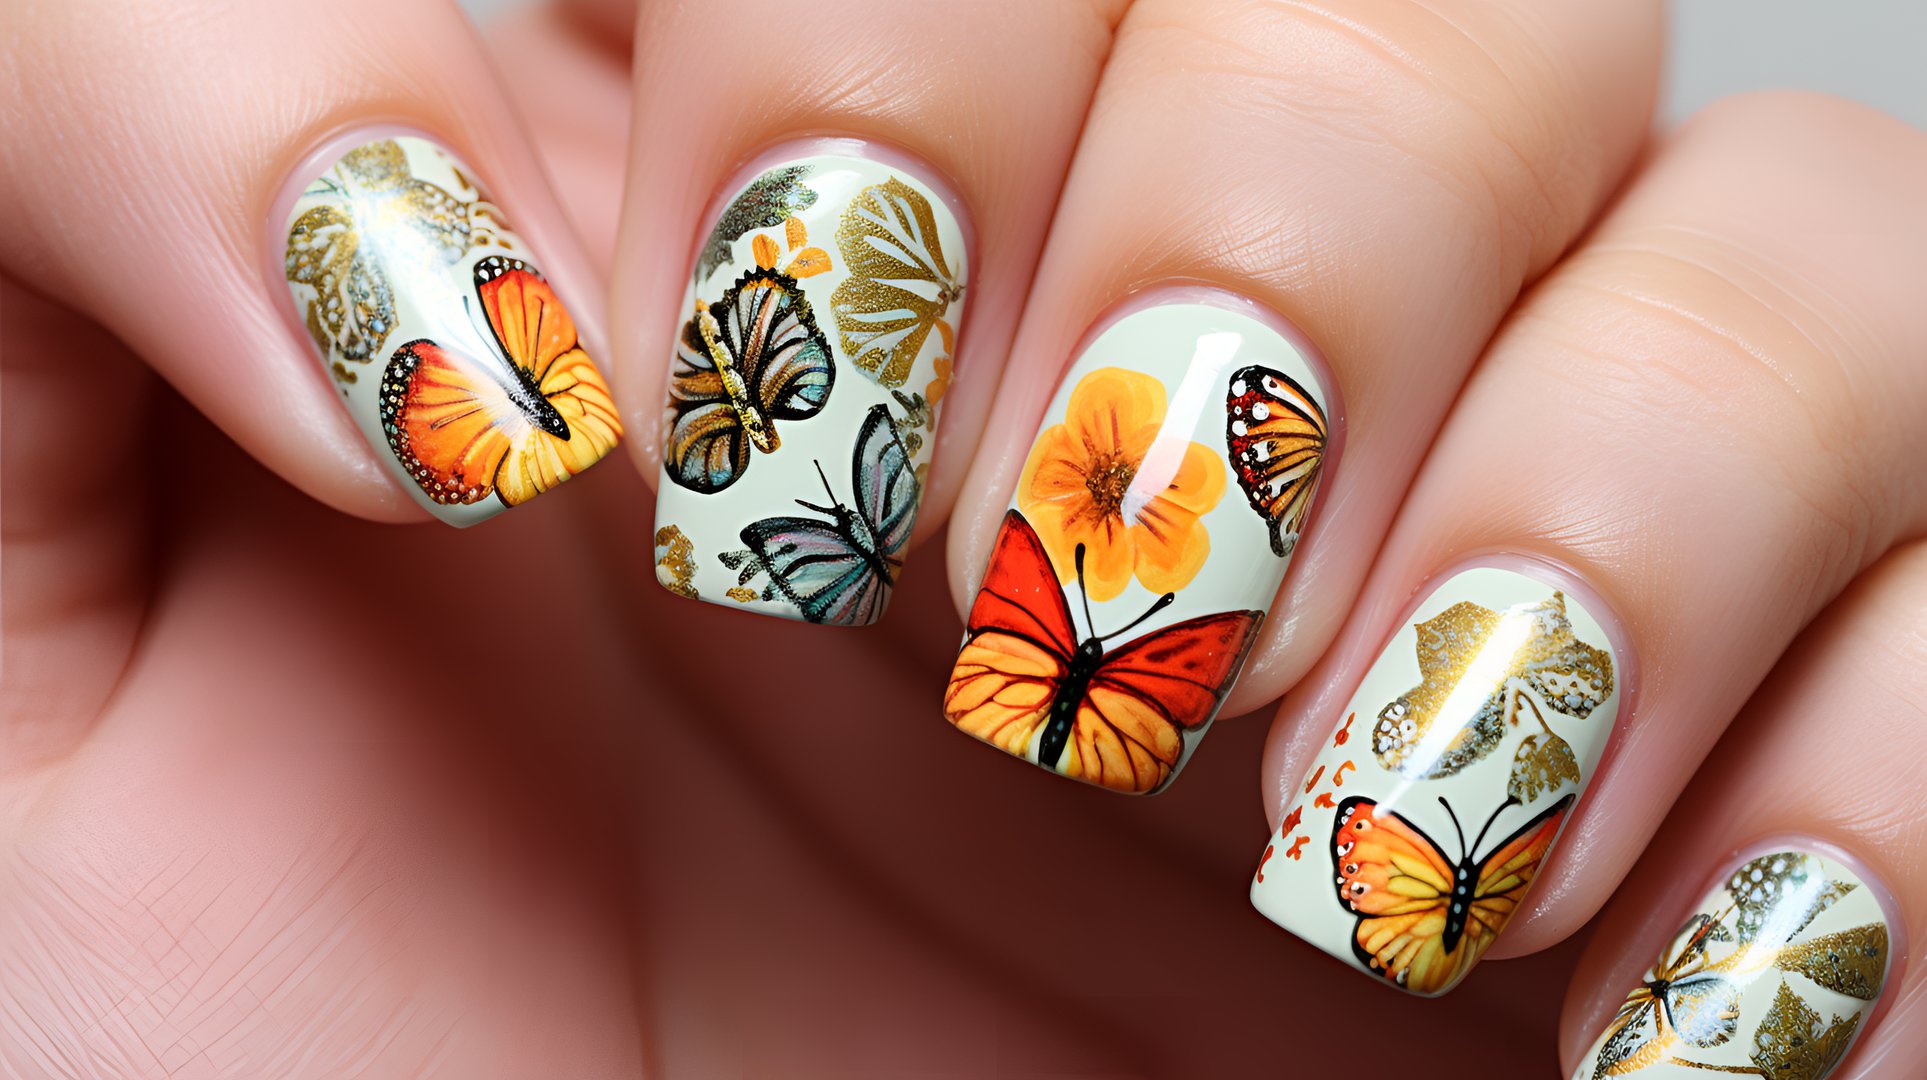 Rainbow Butterfly Nail Art Decal Sticker - Nailodia